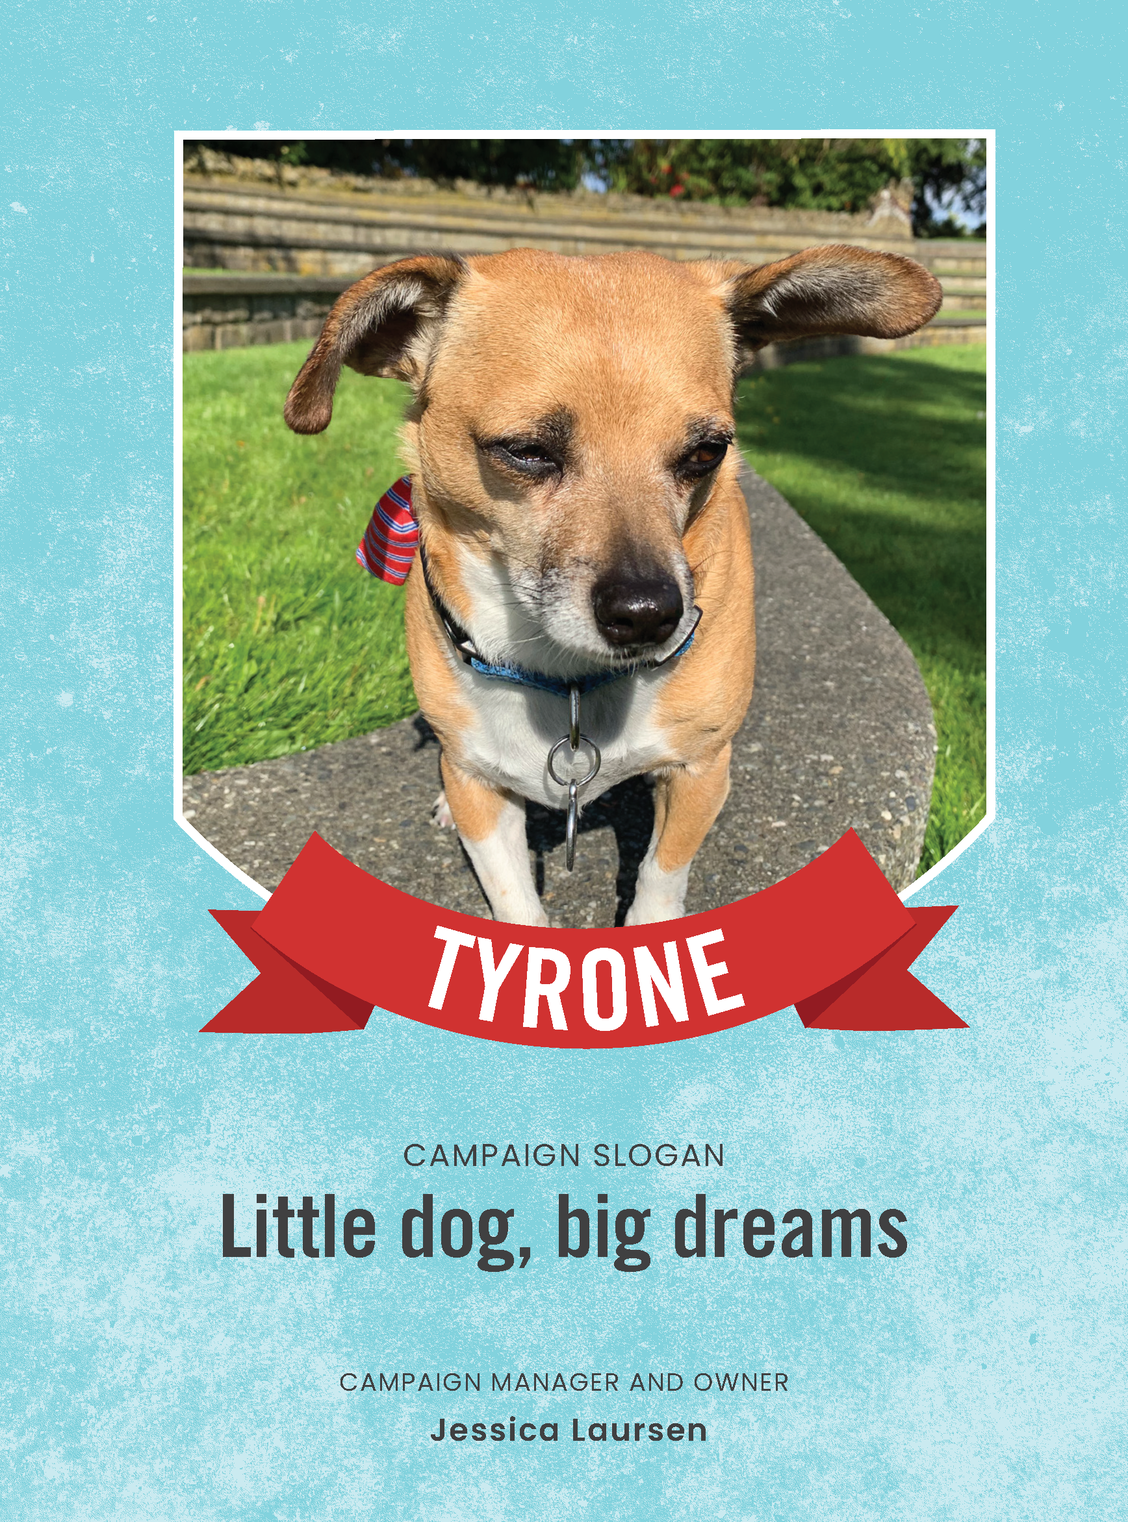 Vote for Tyrone!